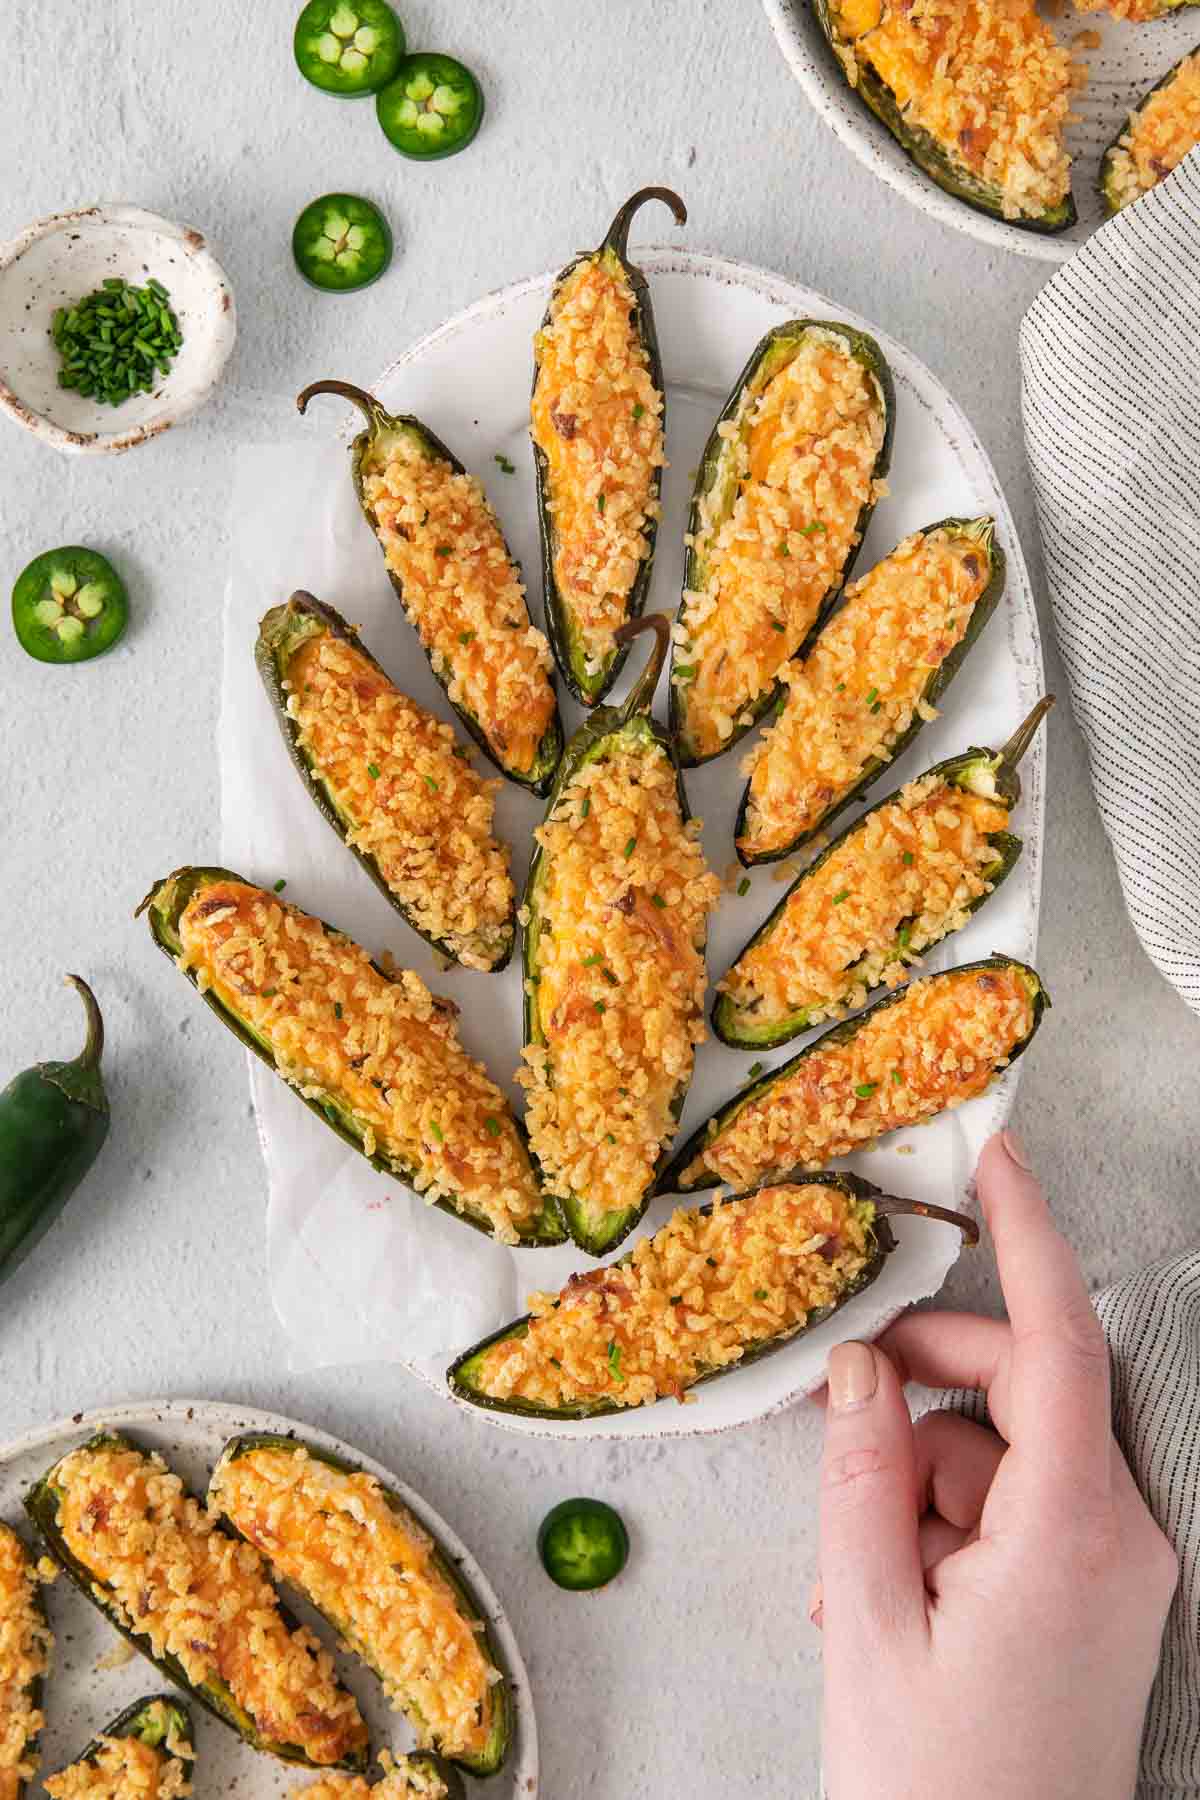 Gluten-free jalapeno poppers on a tray with a hand touching the tray